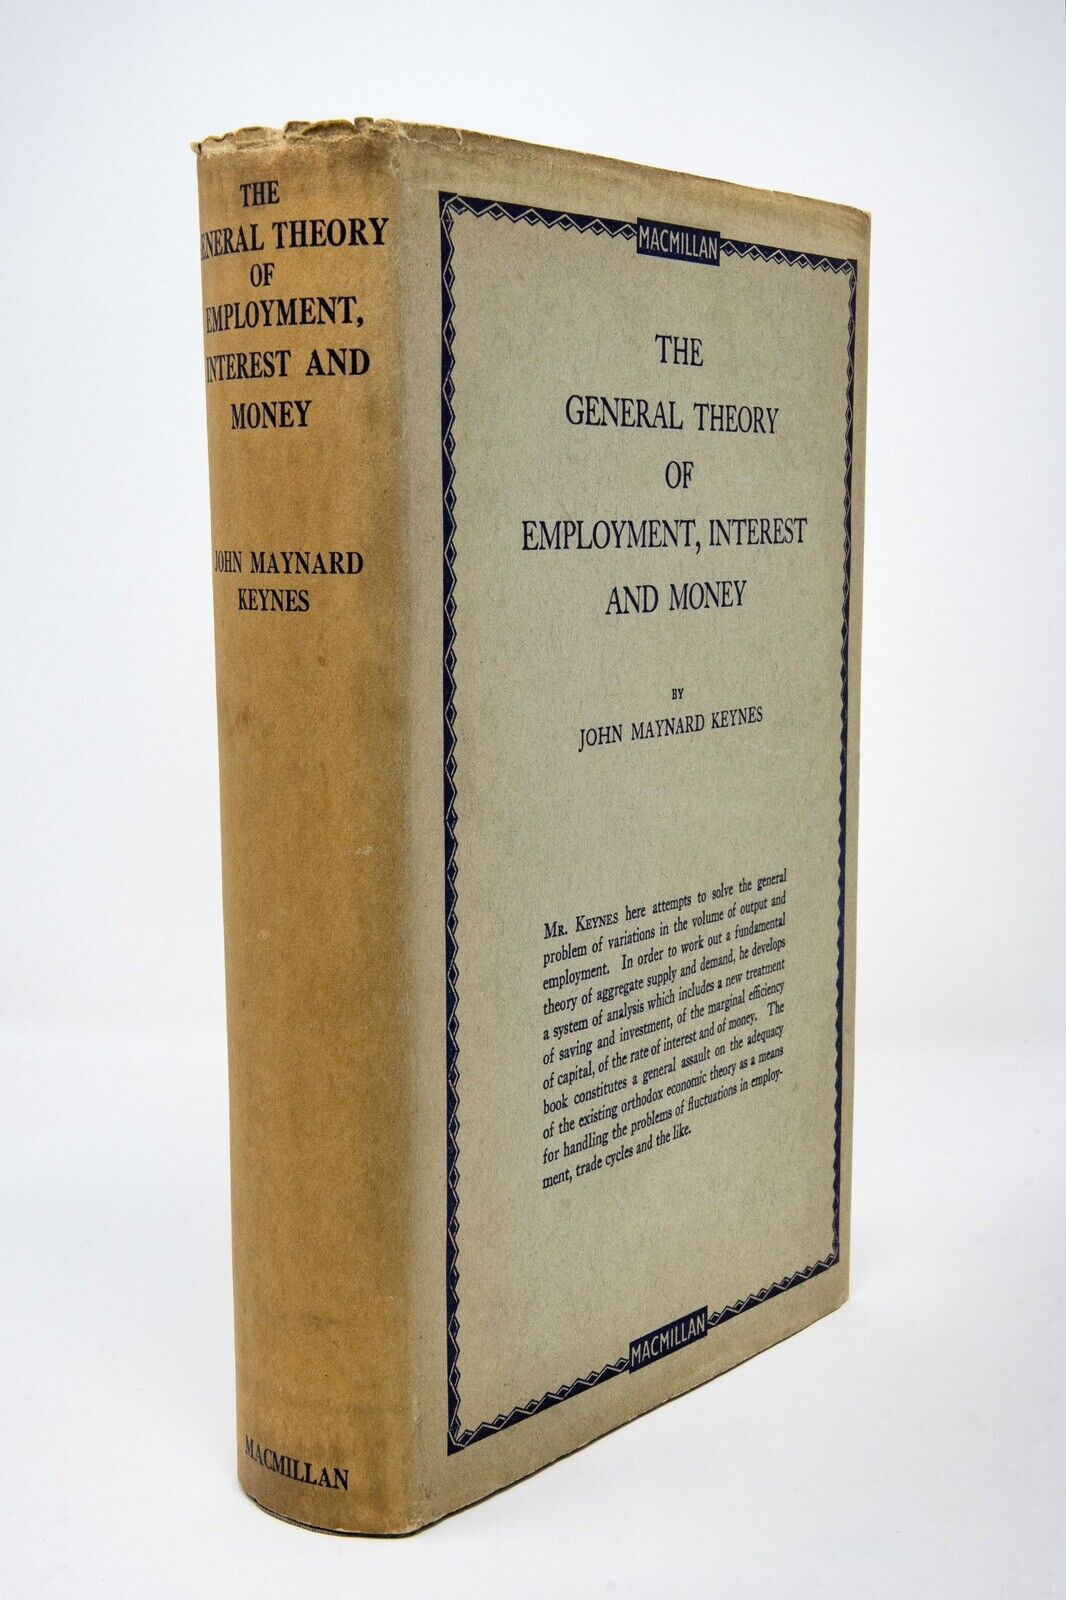 Keynes, John Maynard - The General Theory of Employment, Interest, and Money - First Edition, First DJ